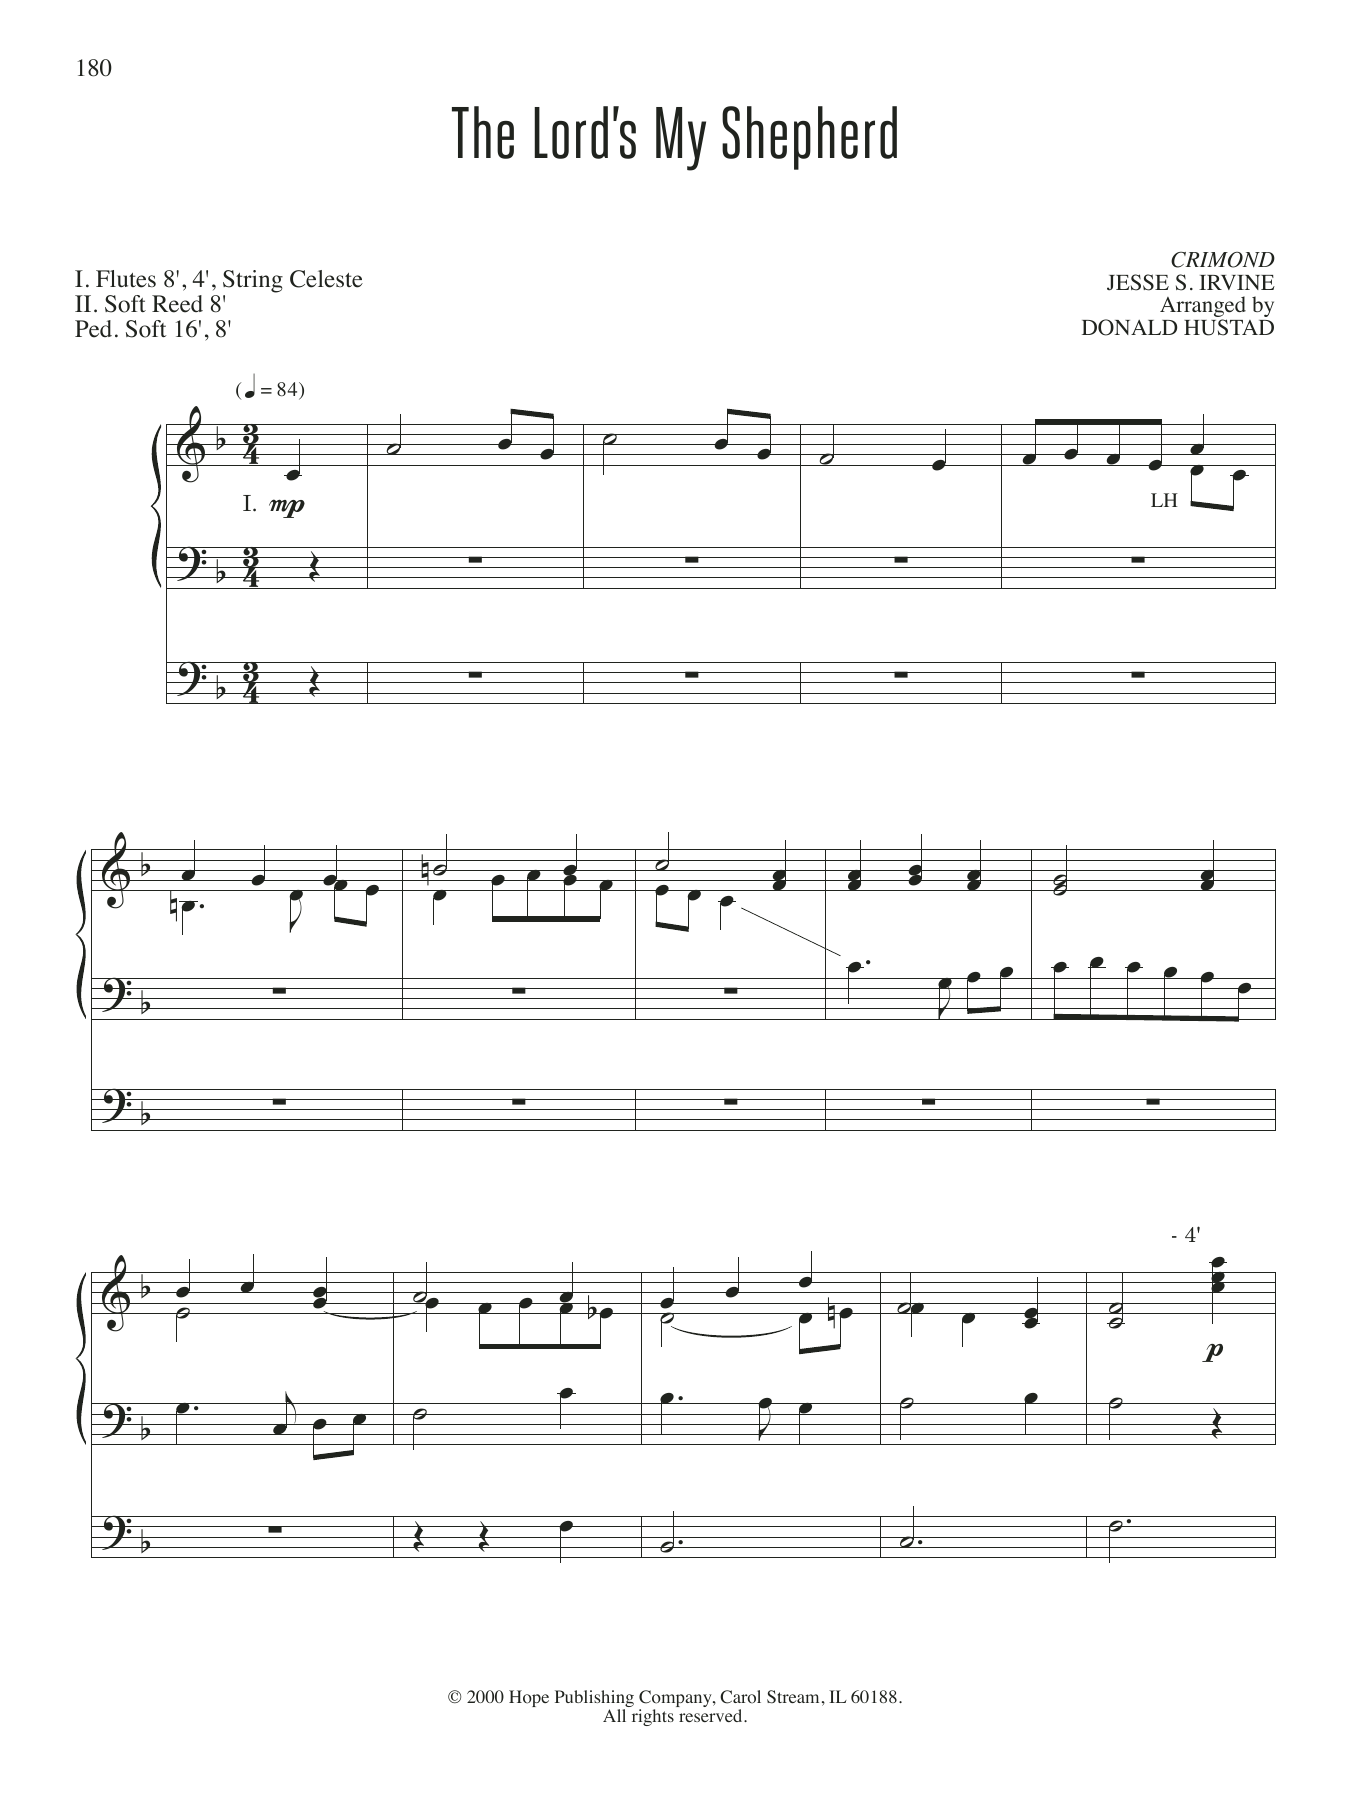 Download Don Hustad The Lord's My Shepherd Sheet Music